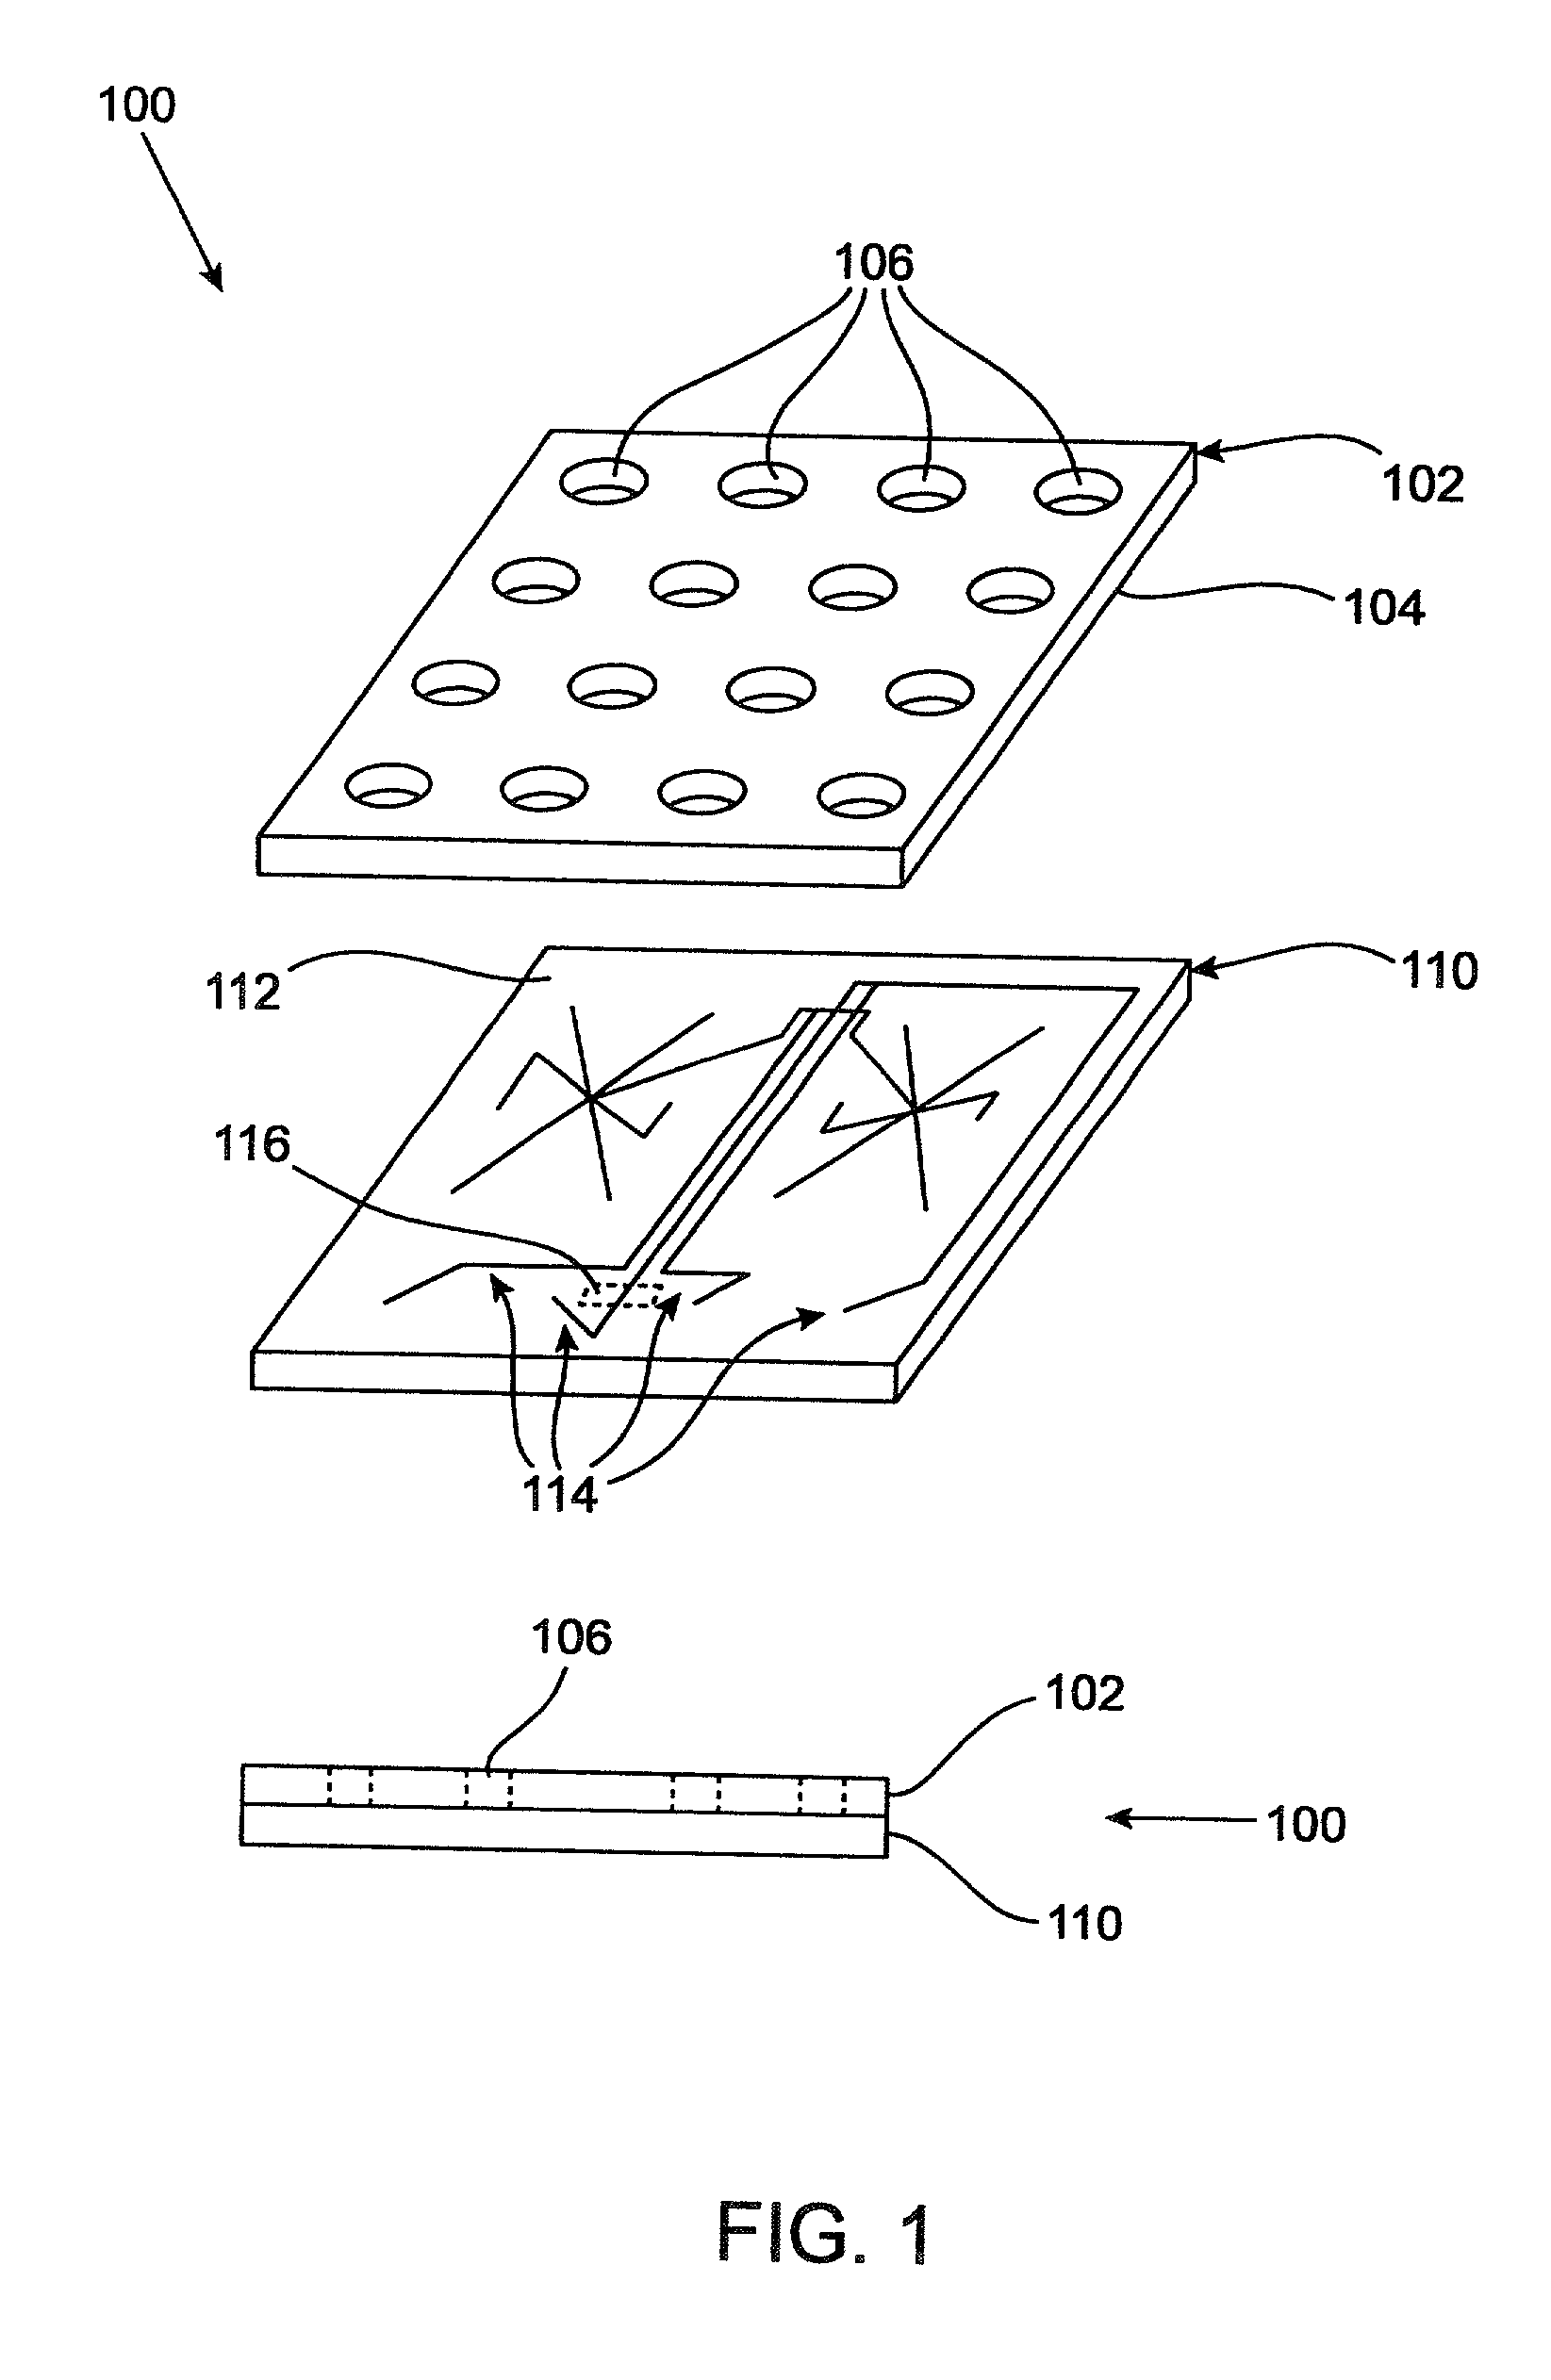 Microfluidic devices and systems incorporating cover layers